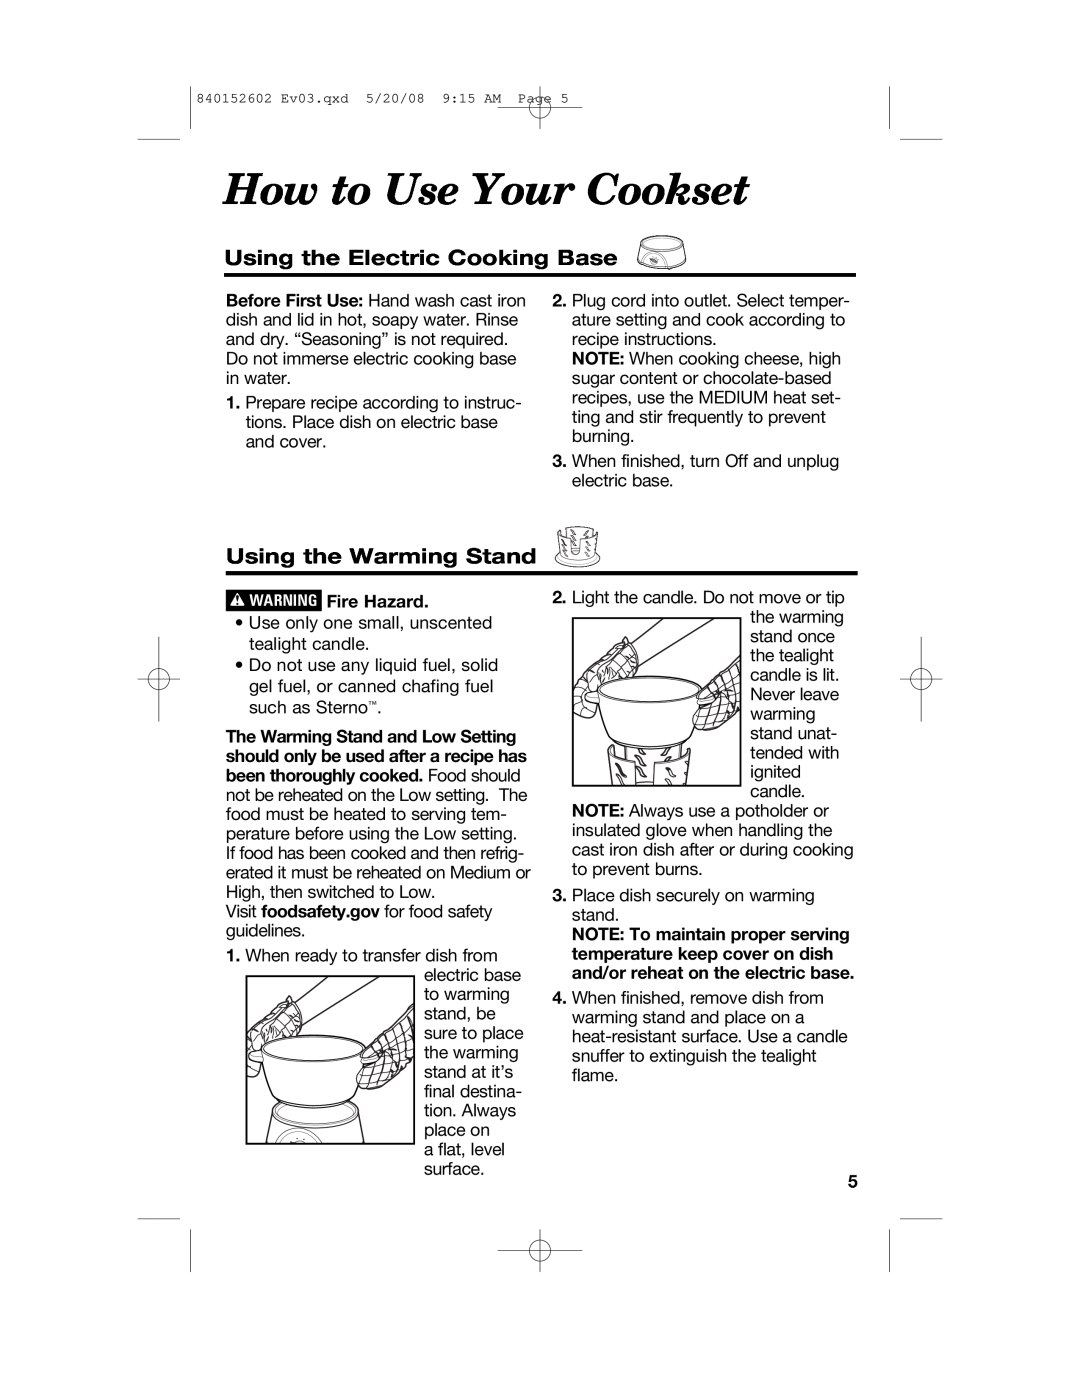 Hamilton Beach 840152602 manual How to Use Your Cookset, Using the Electric Cooking Base, Using the Warming Stand 